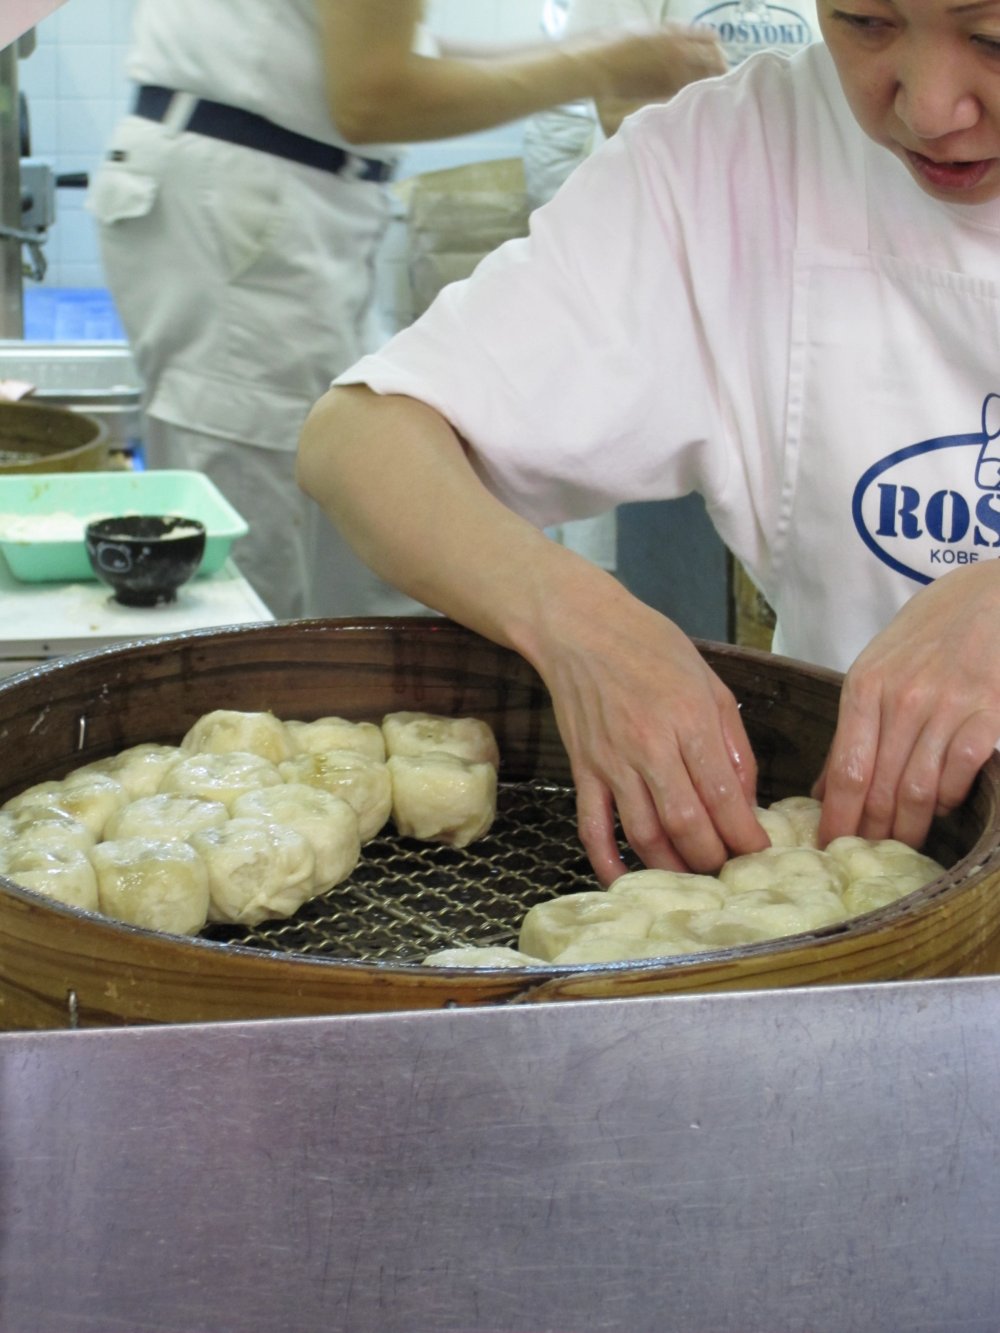 The chefs at work, preparing delcious nikuman (steamed bun with meat filling)